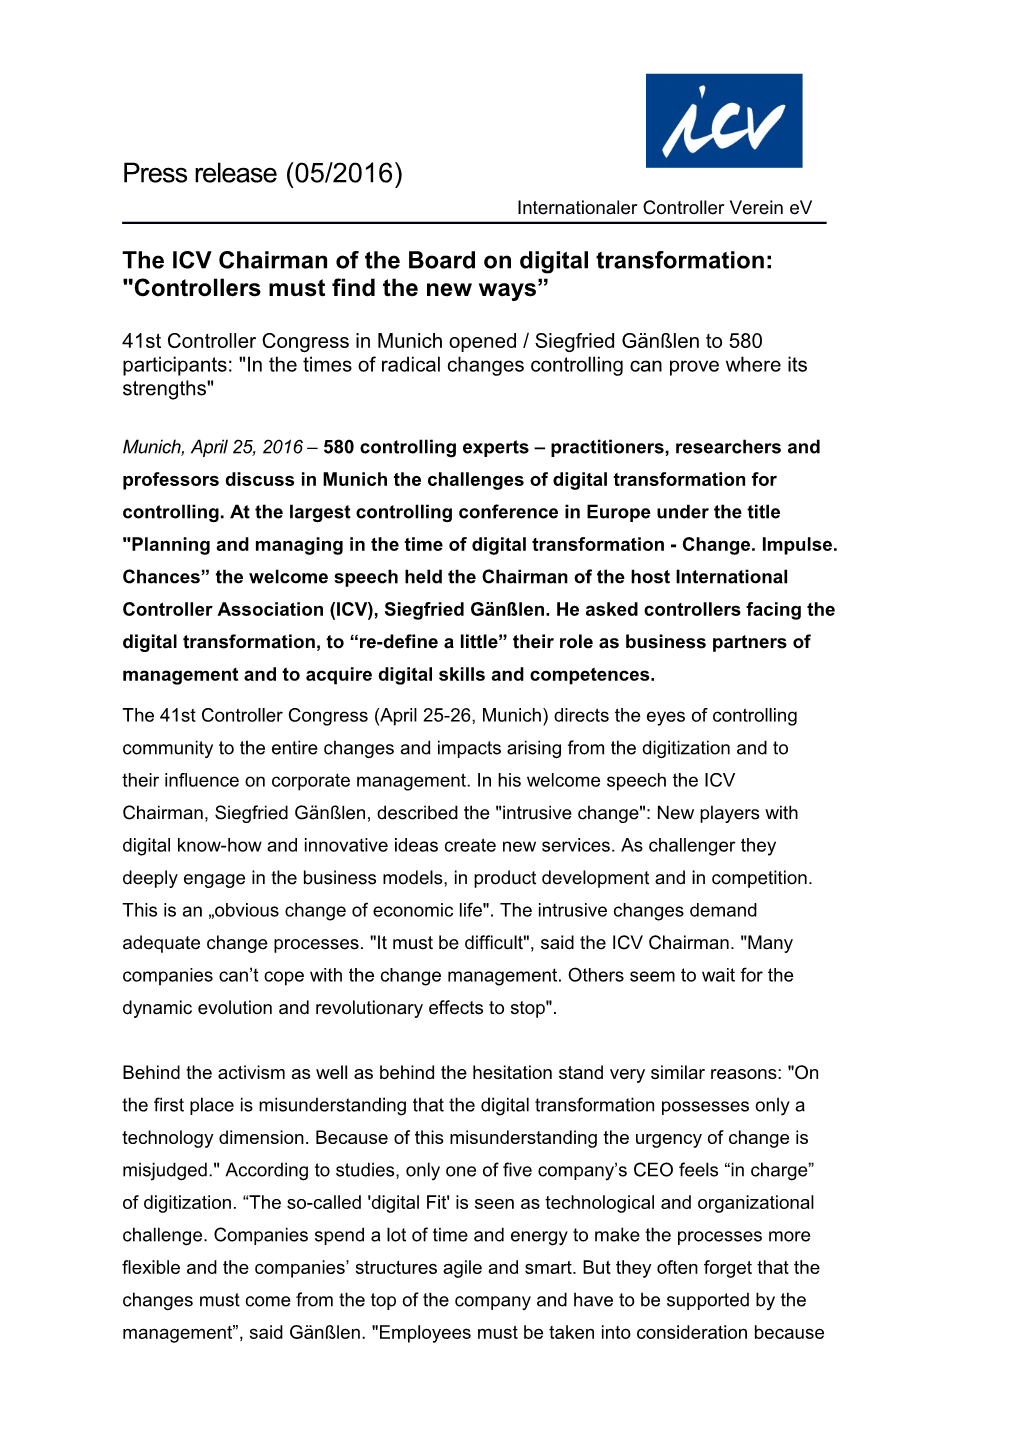 The ICV Chairman of the Board on Digital Transformation: Controllers Must Find the New Ways